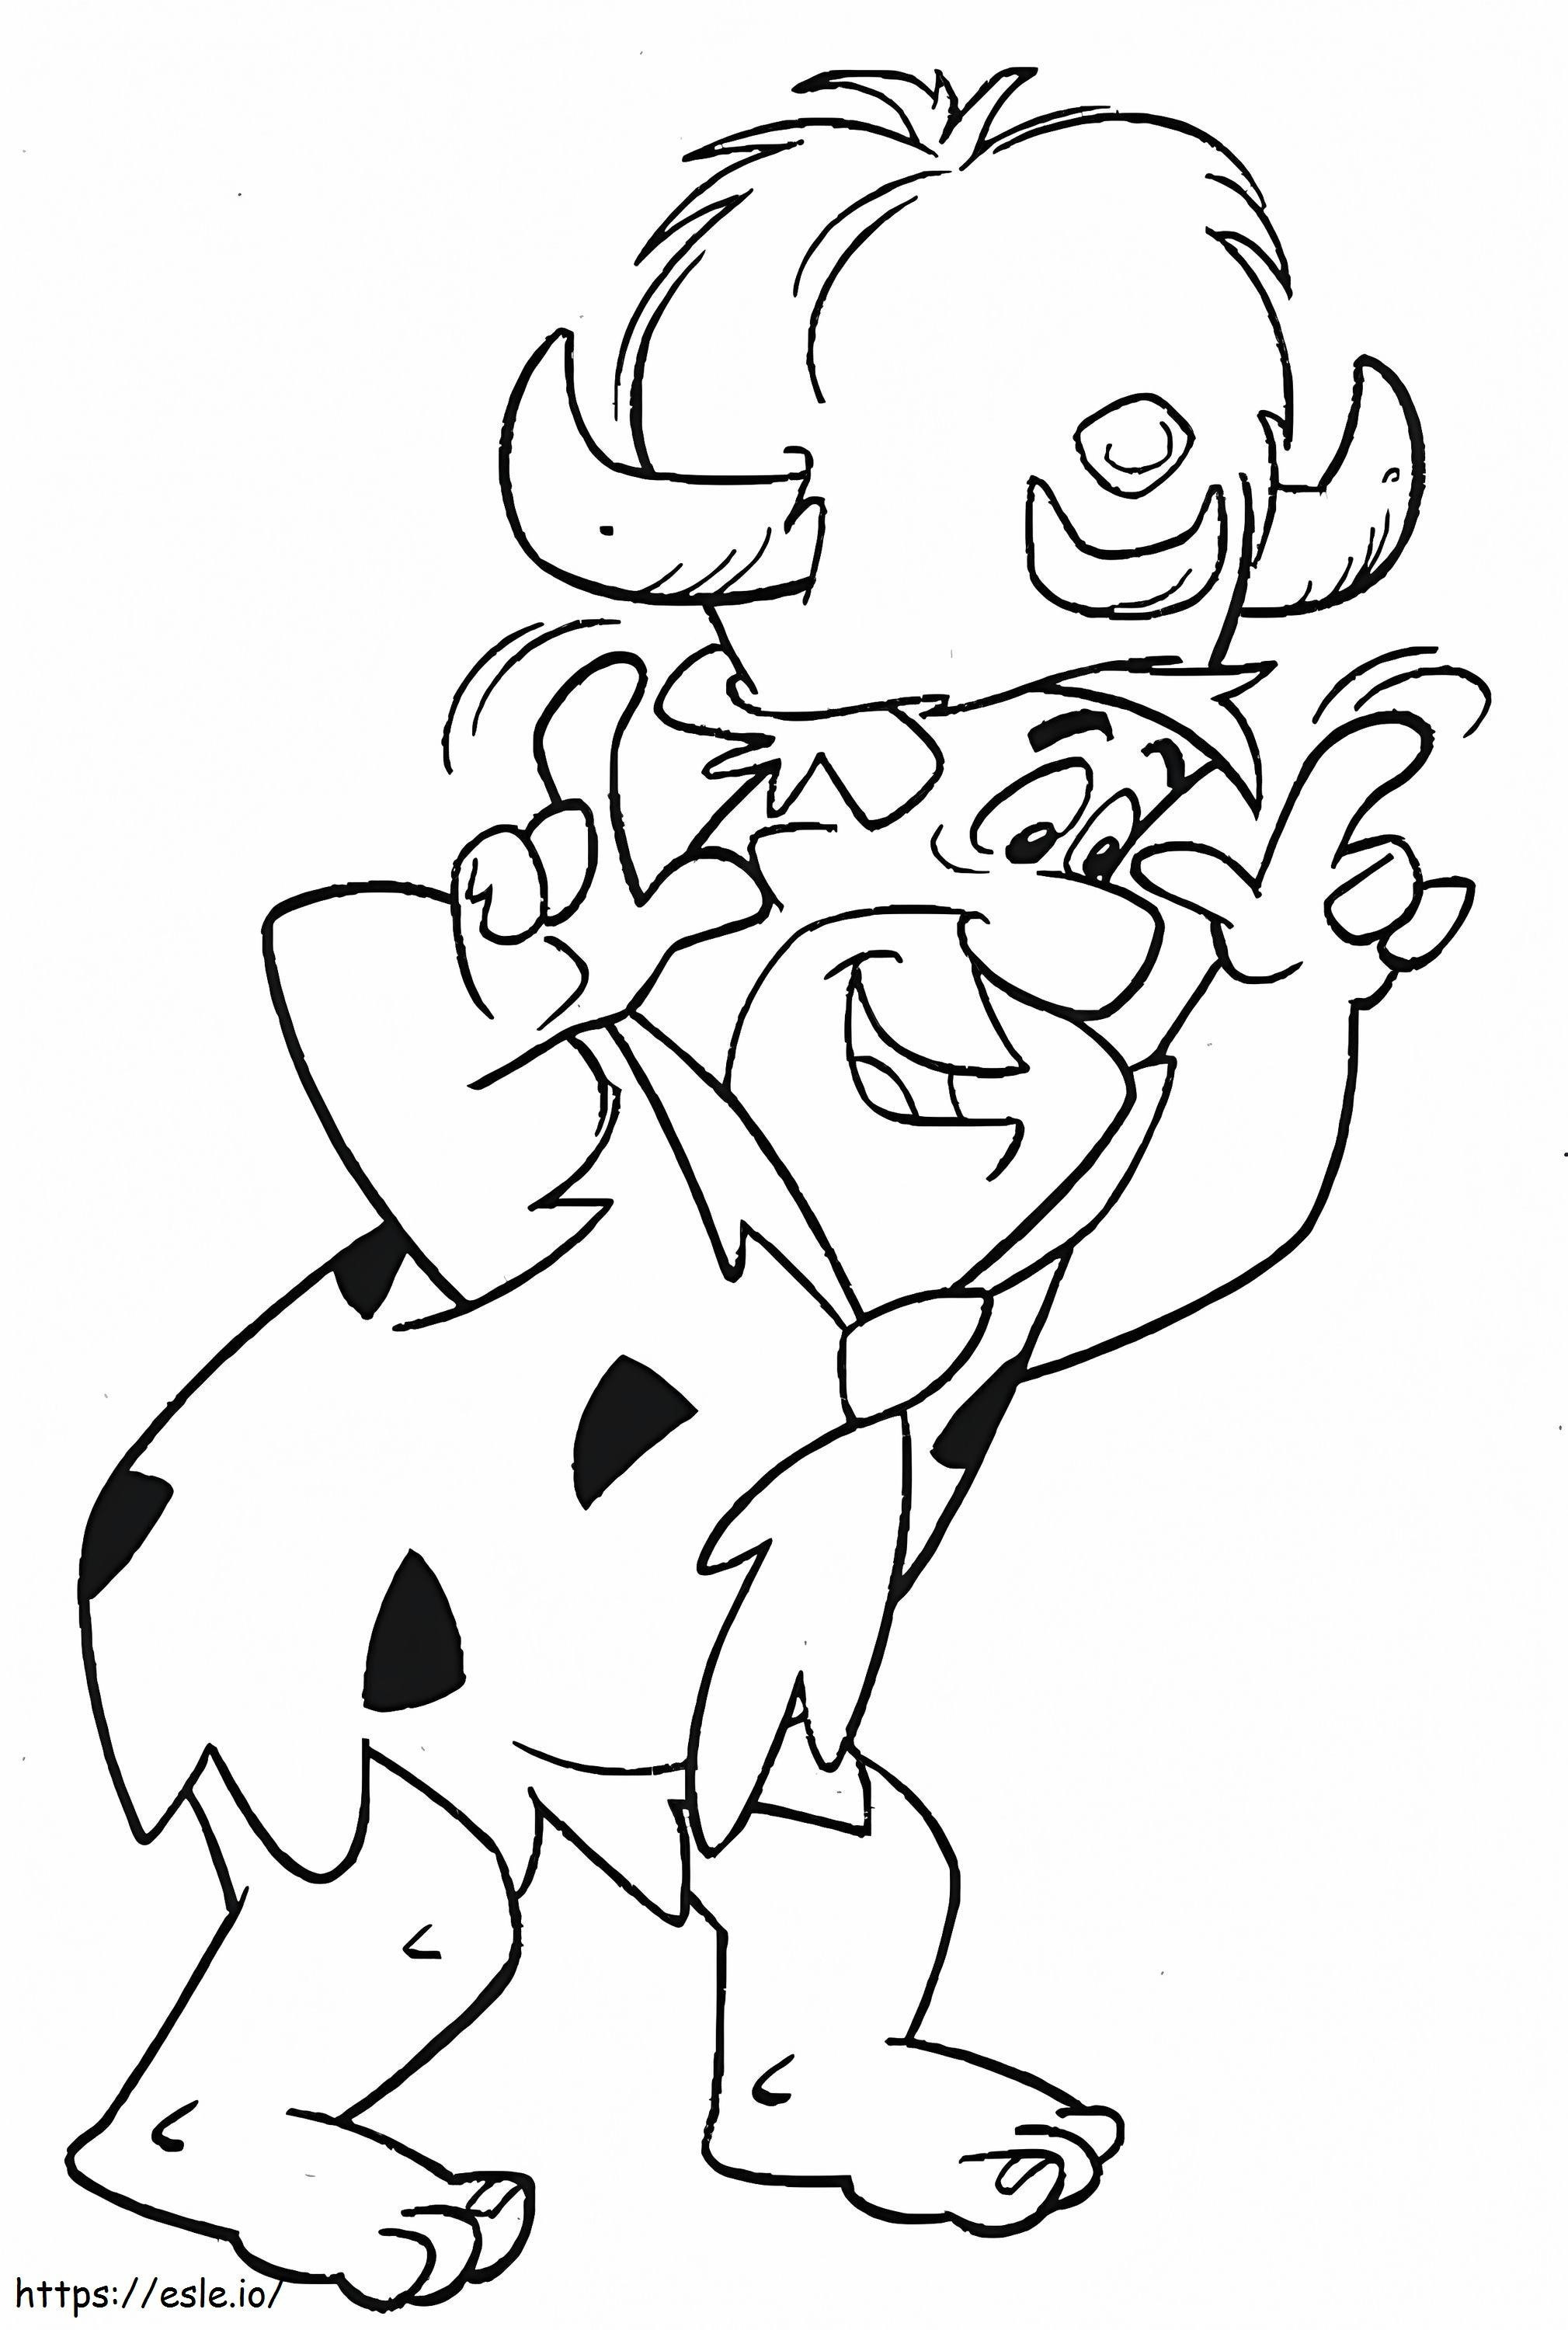 Printable Fred Flintstone coloring page